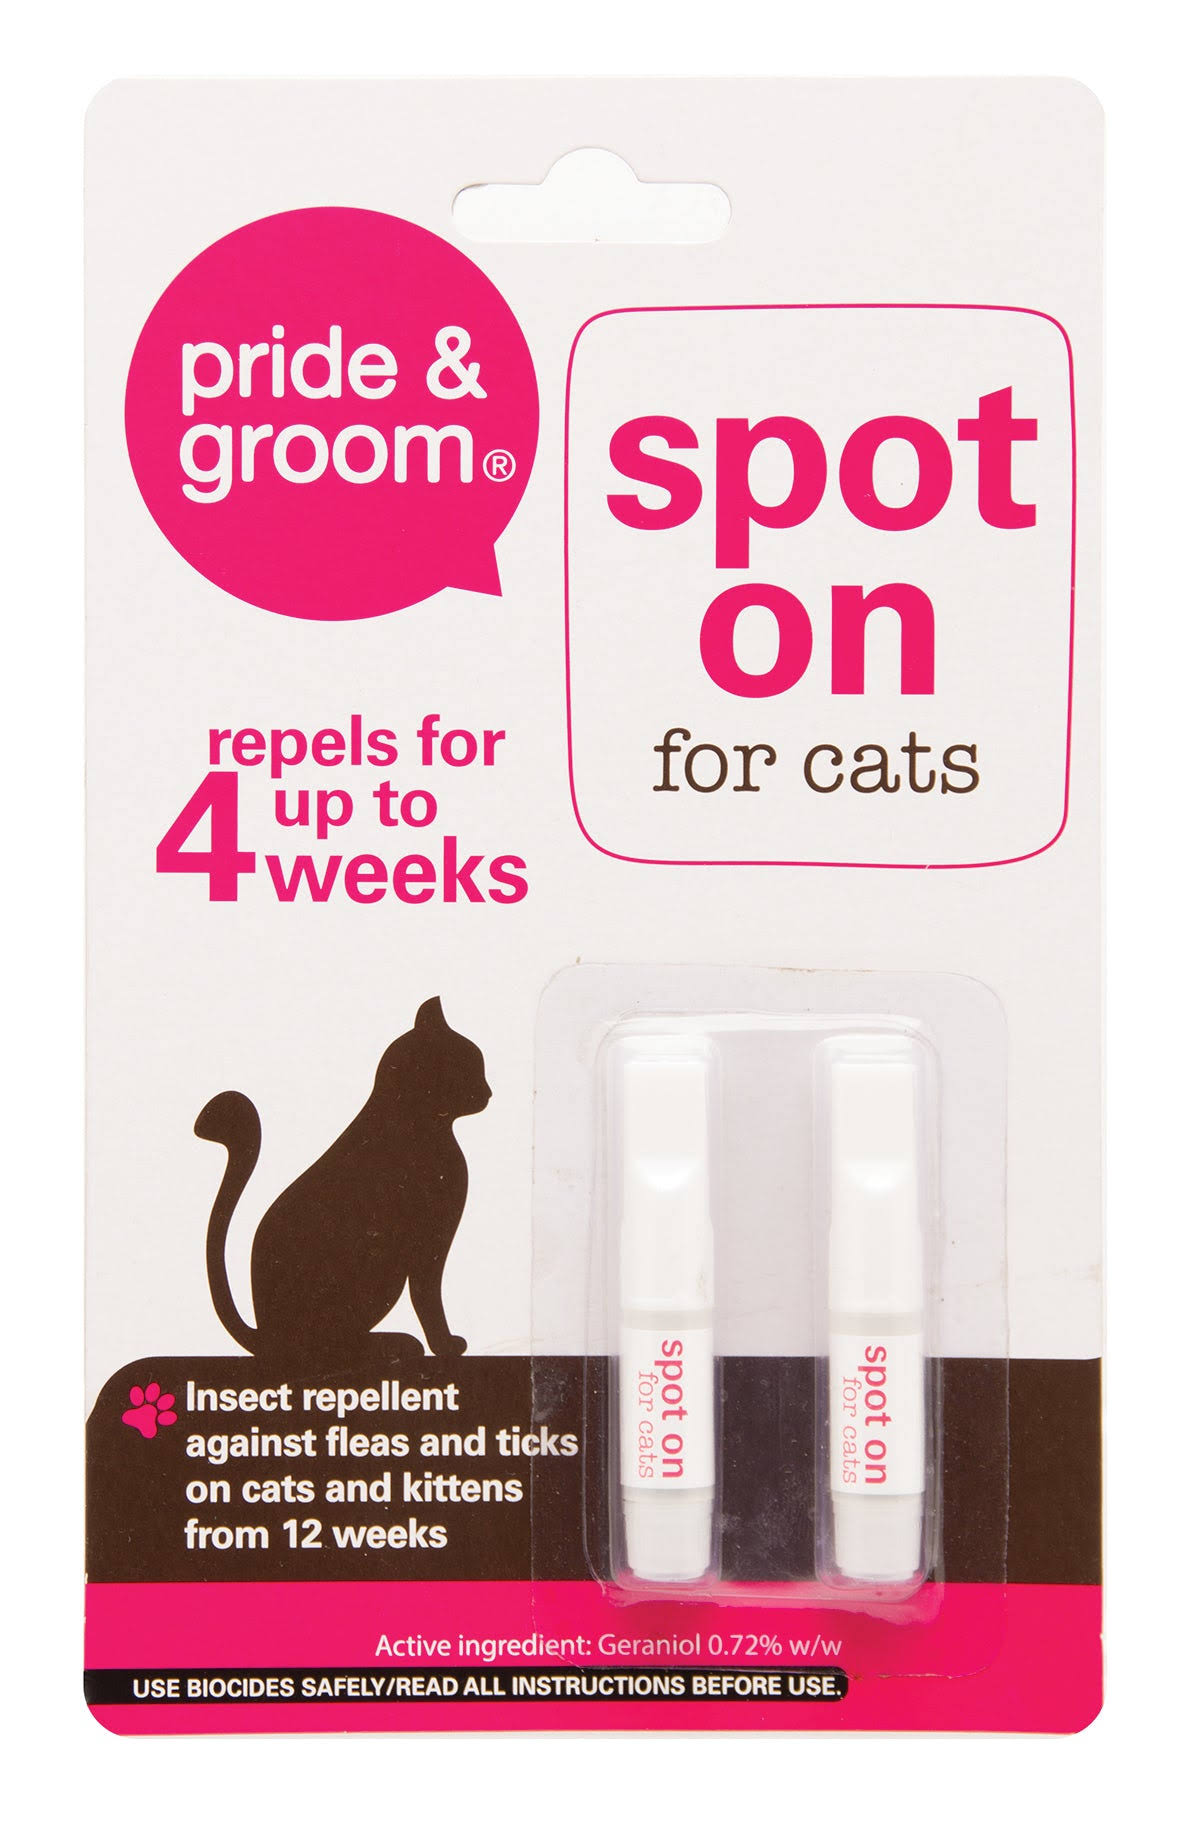 Pride & Groom Pack of 2 Spot On For Cats Flea & Tick Treatment Insect Repellent